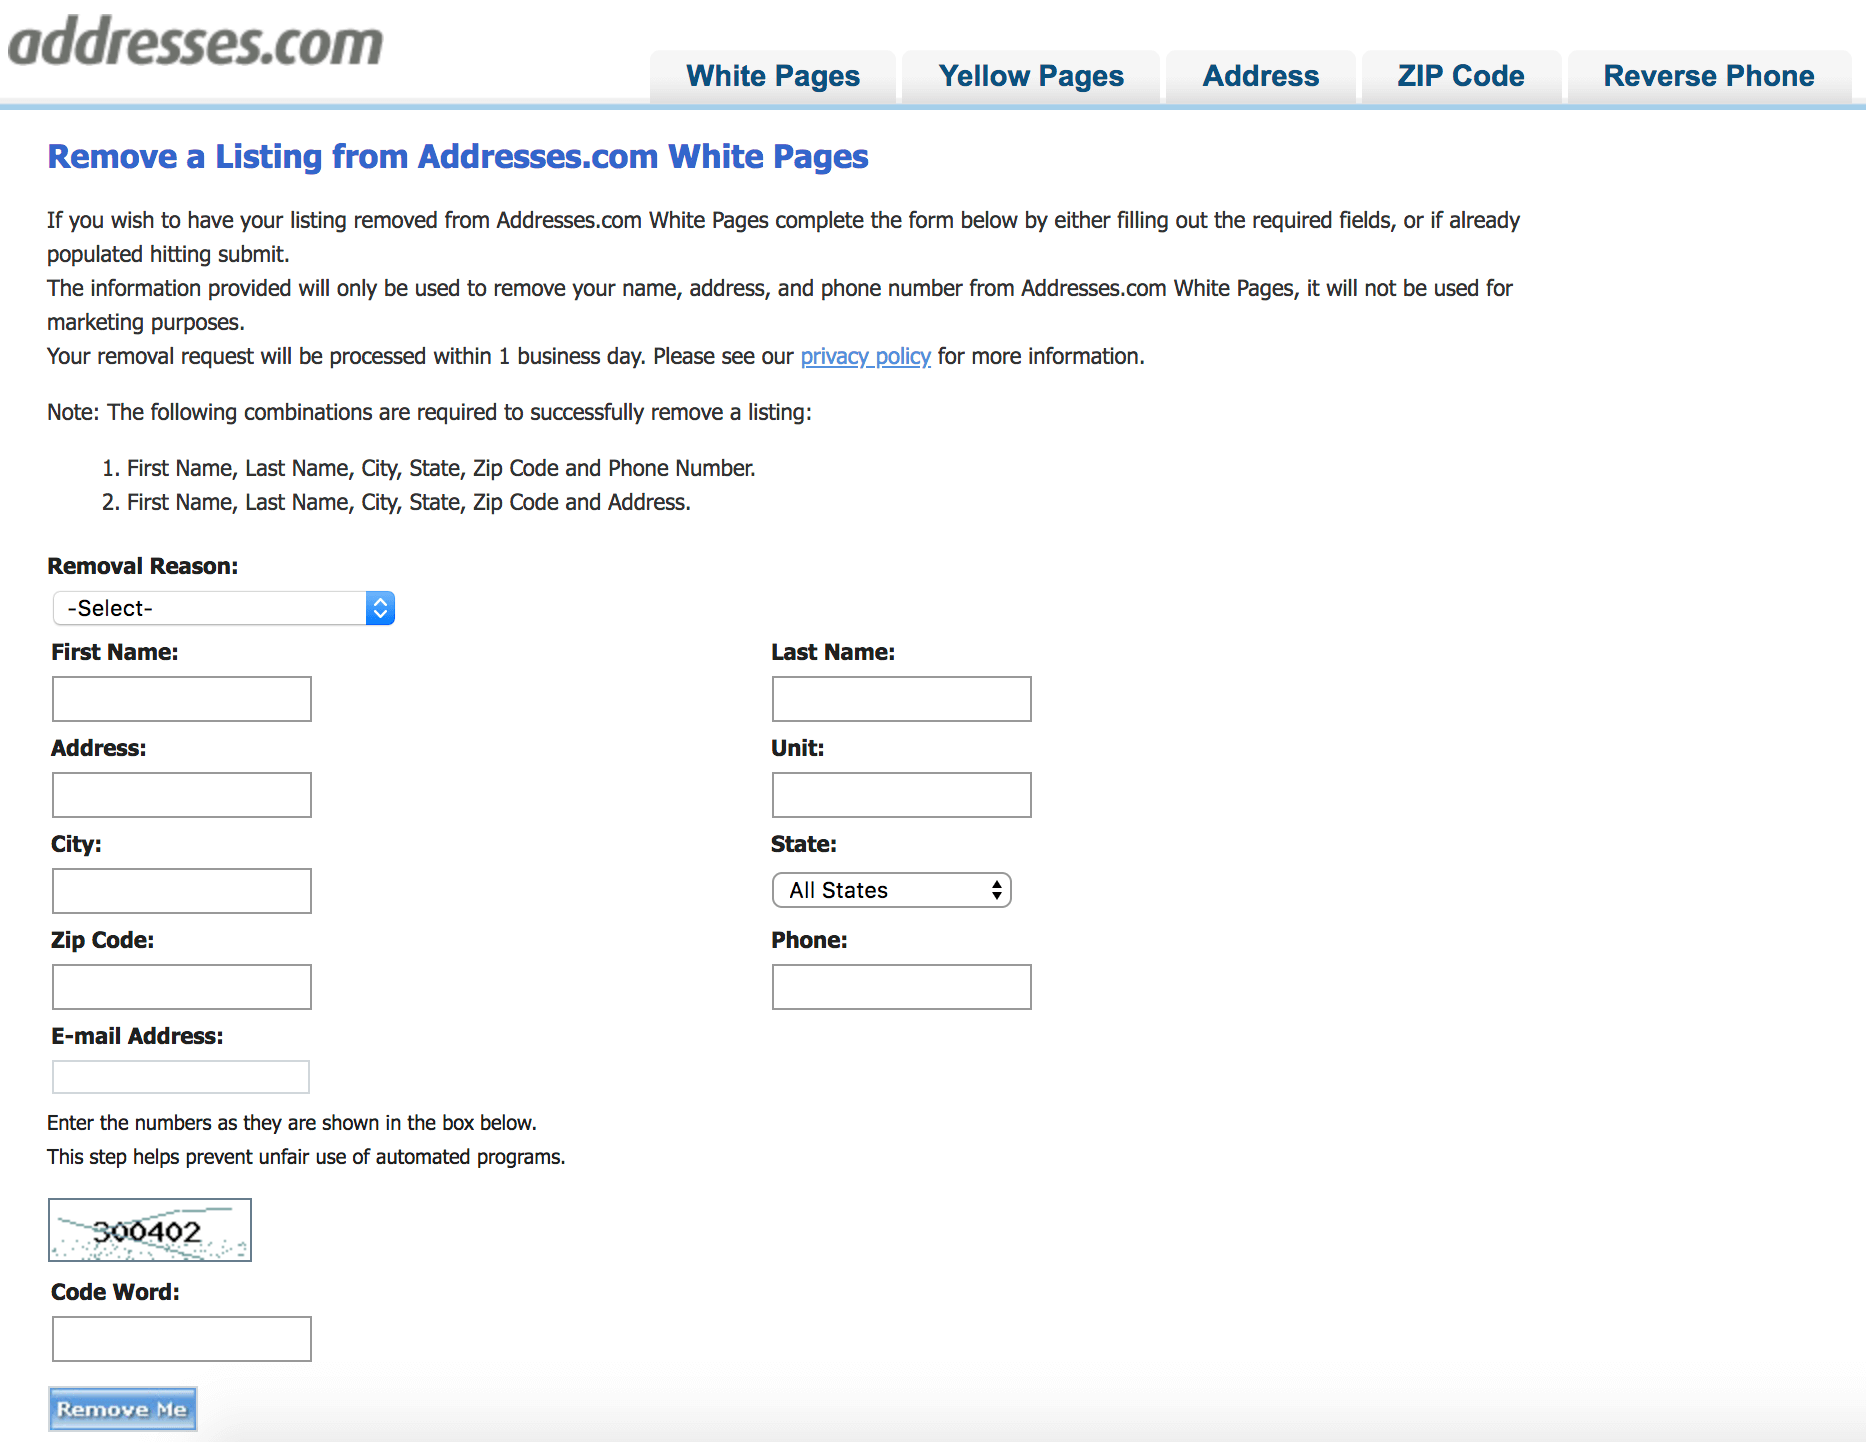 remove yourself from addresses.com removal opt out